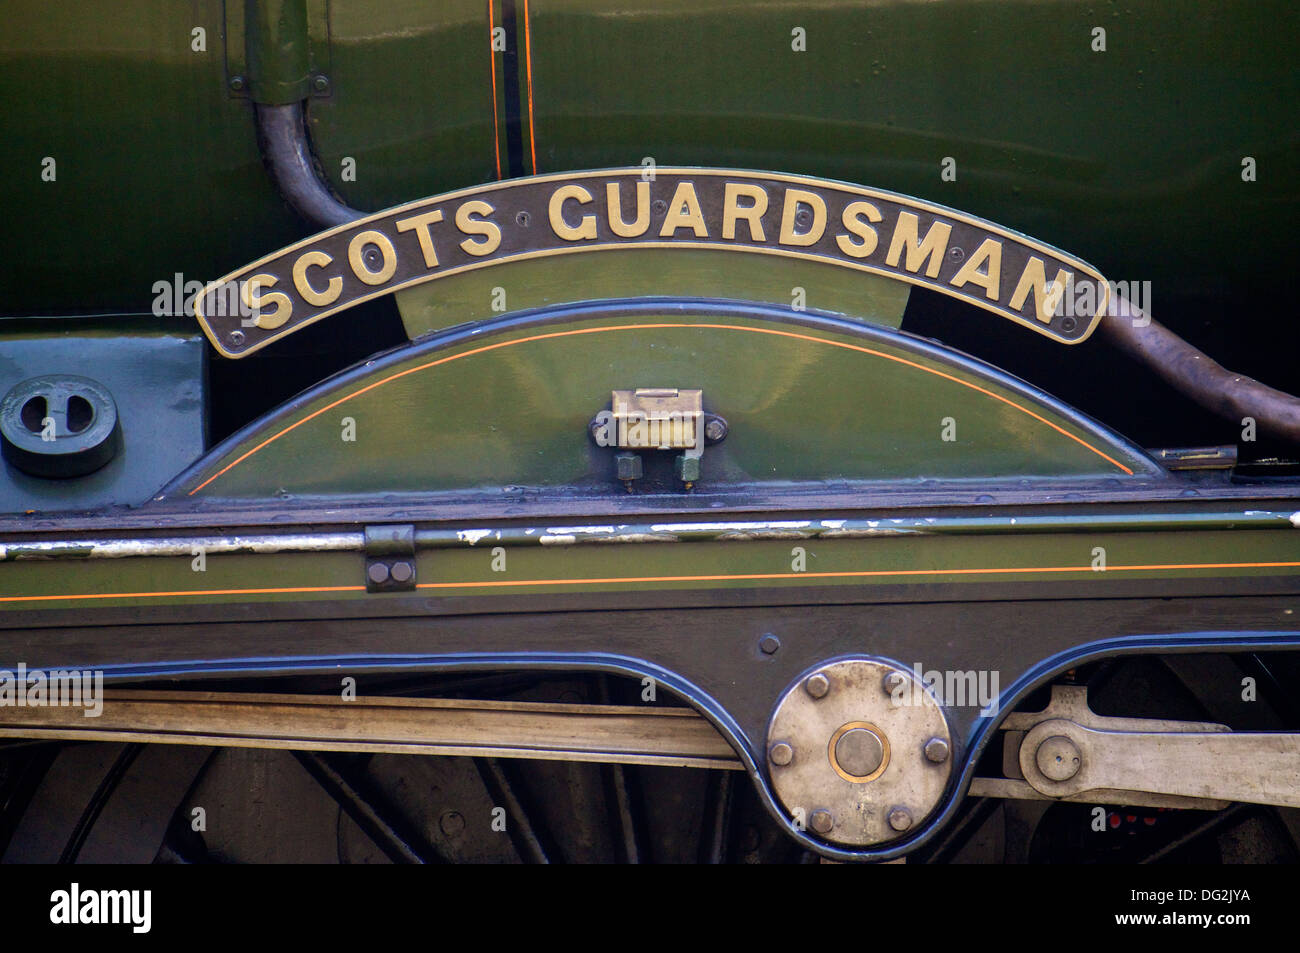 'Scots Guardsman' name plate and linkages. Carlisle Railway Station with a special charter train. Carlisle Cumbria England. Stock Photo